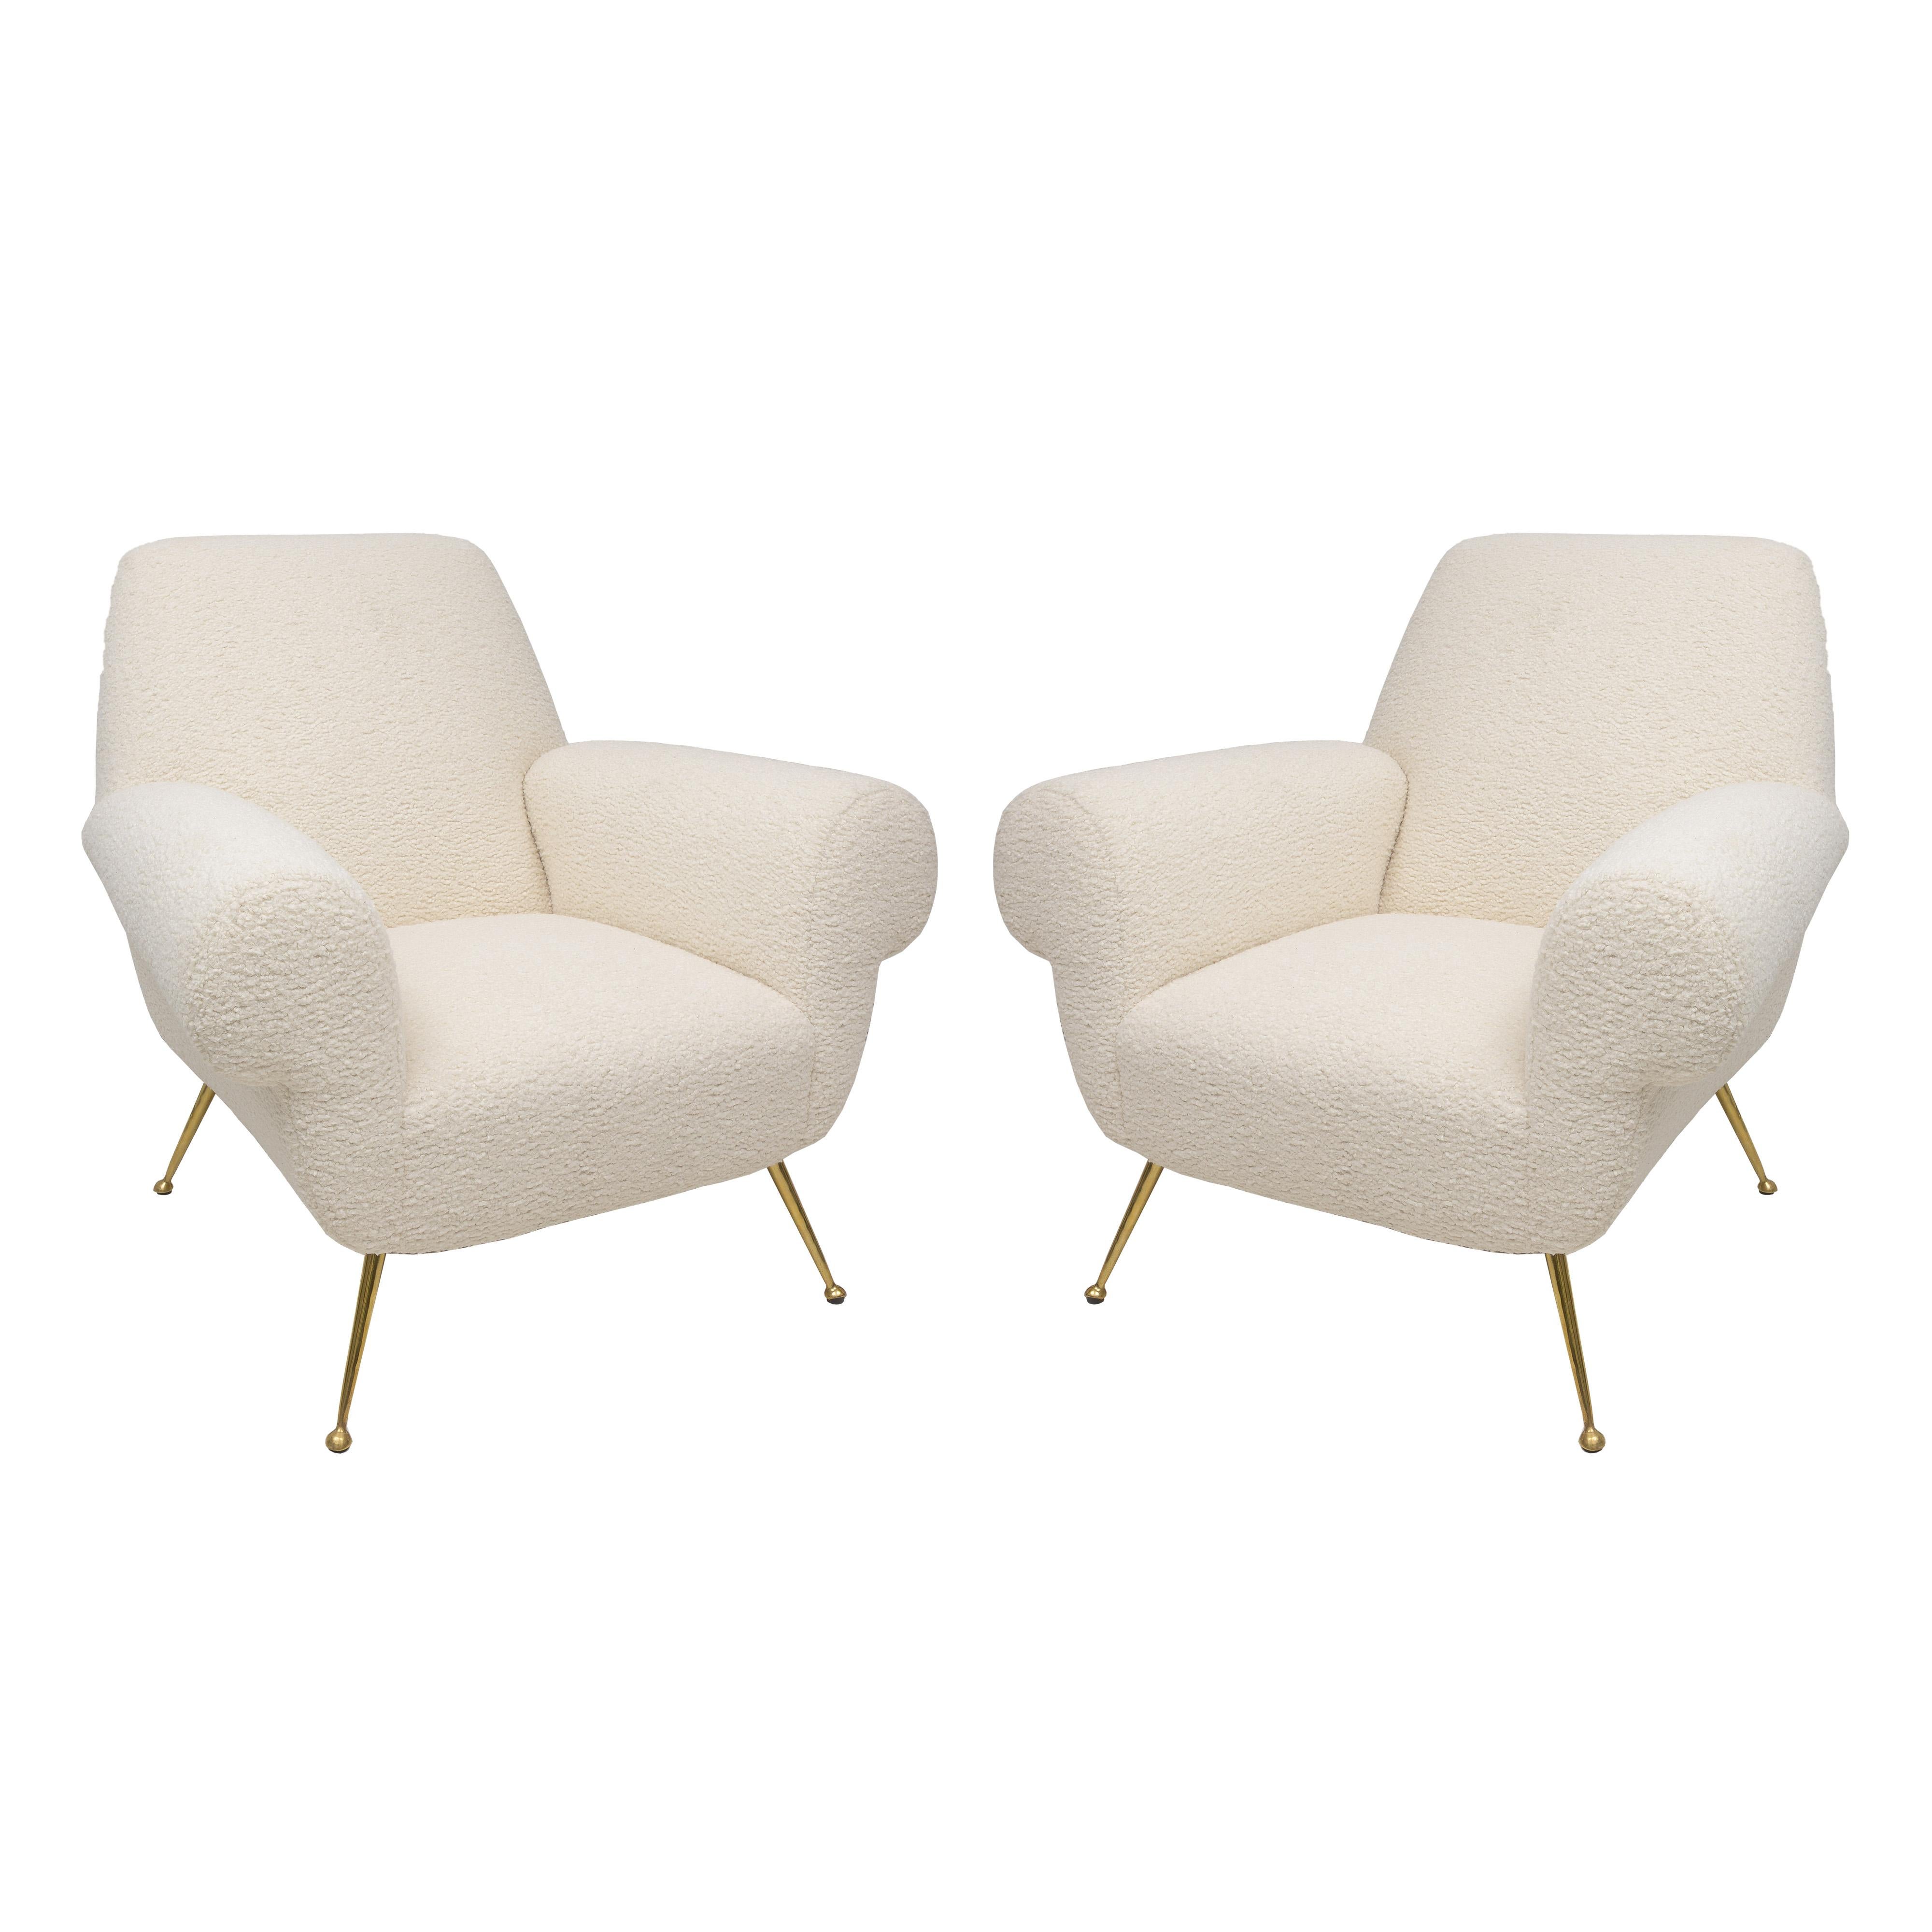 Pair of Italian-Mid-Century Lounge chairs Upholstered in Boucle. Set of 2.